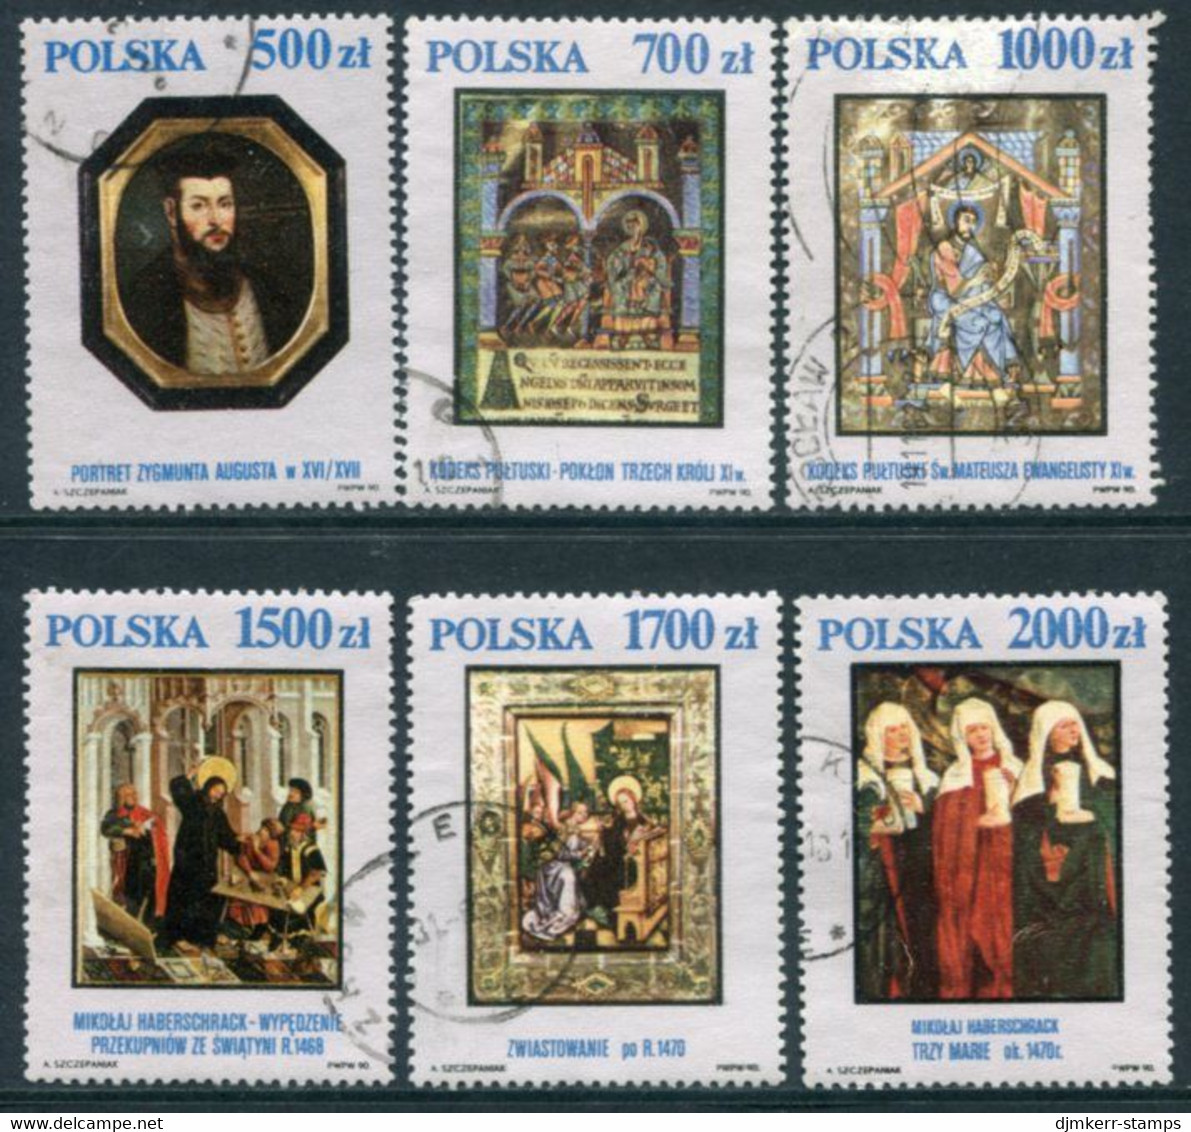 POLAND 1991 Paintings From National Museum Used.  Michel 3306-11 - Usati